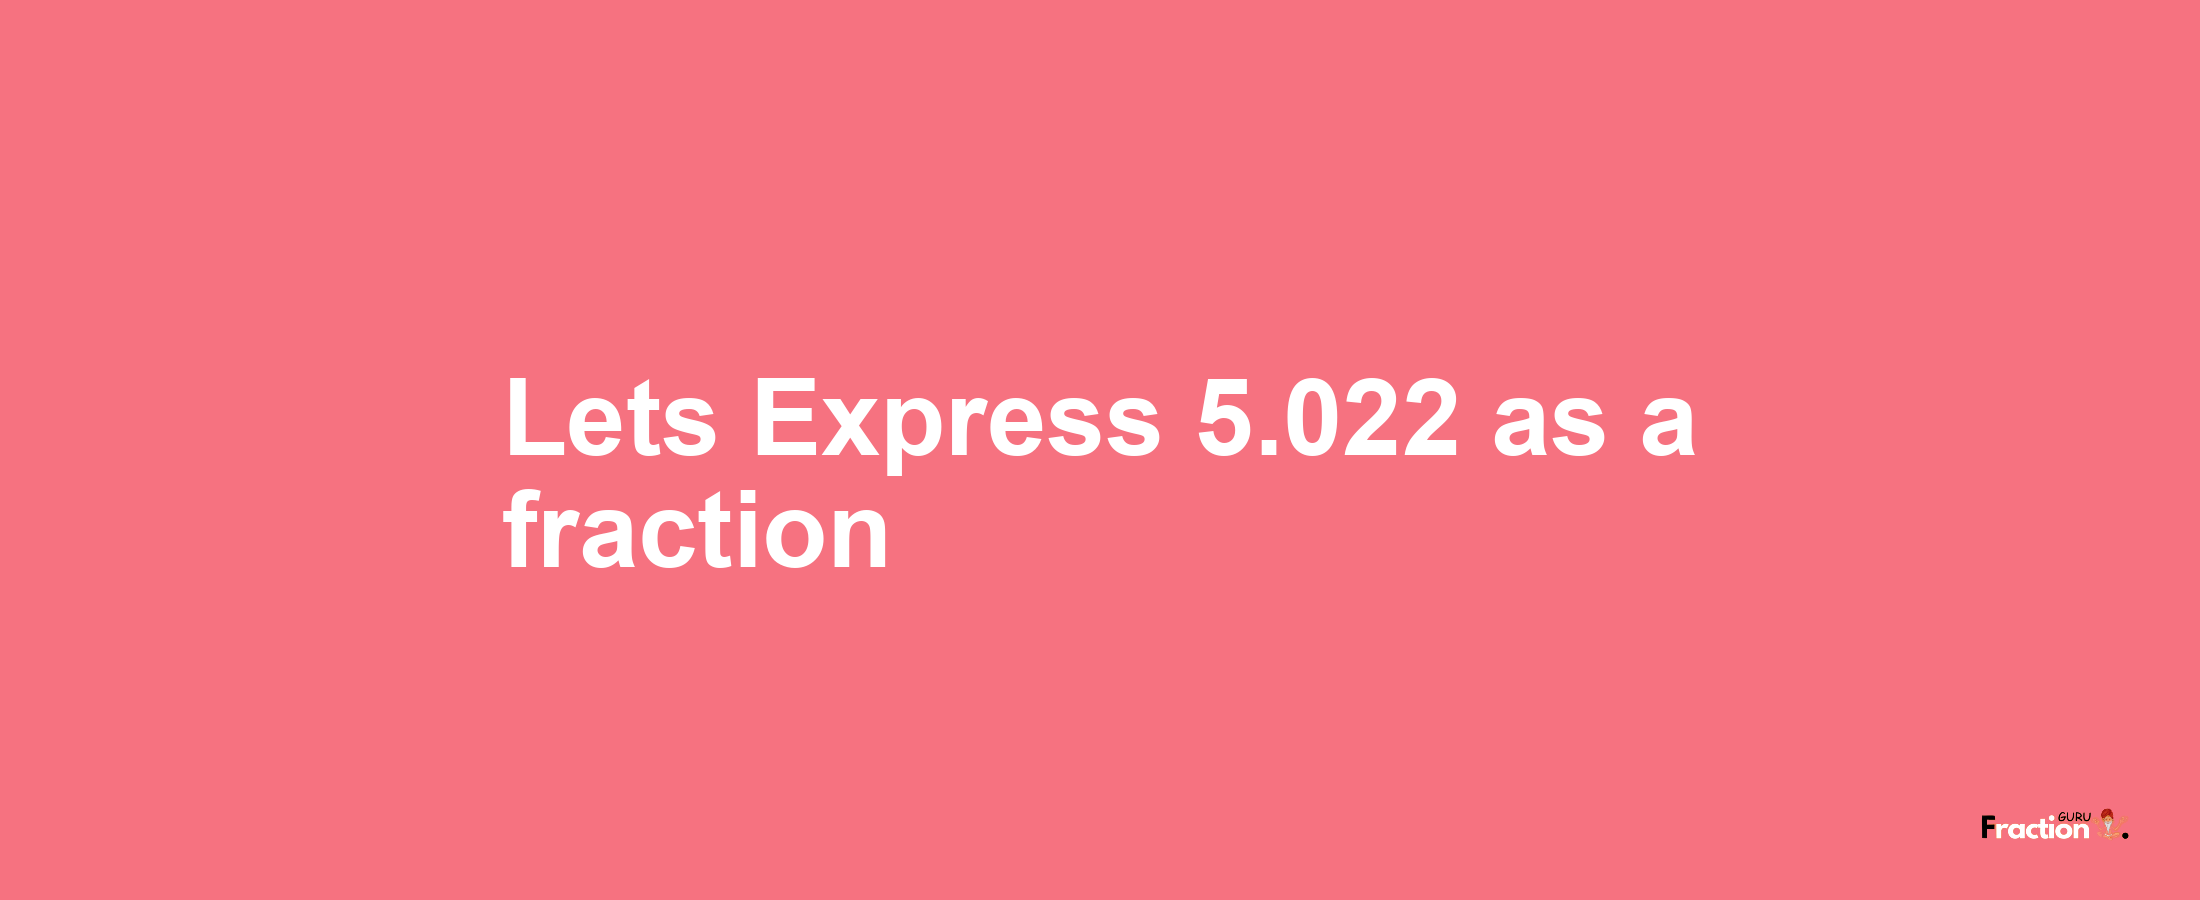 Lets Express 5.022 as afraction